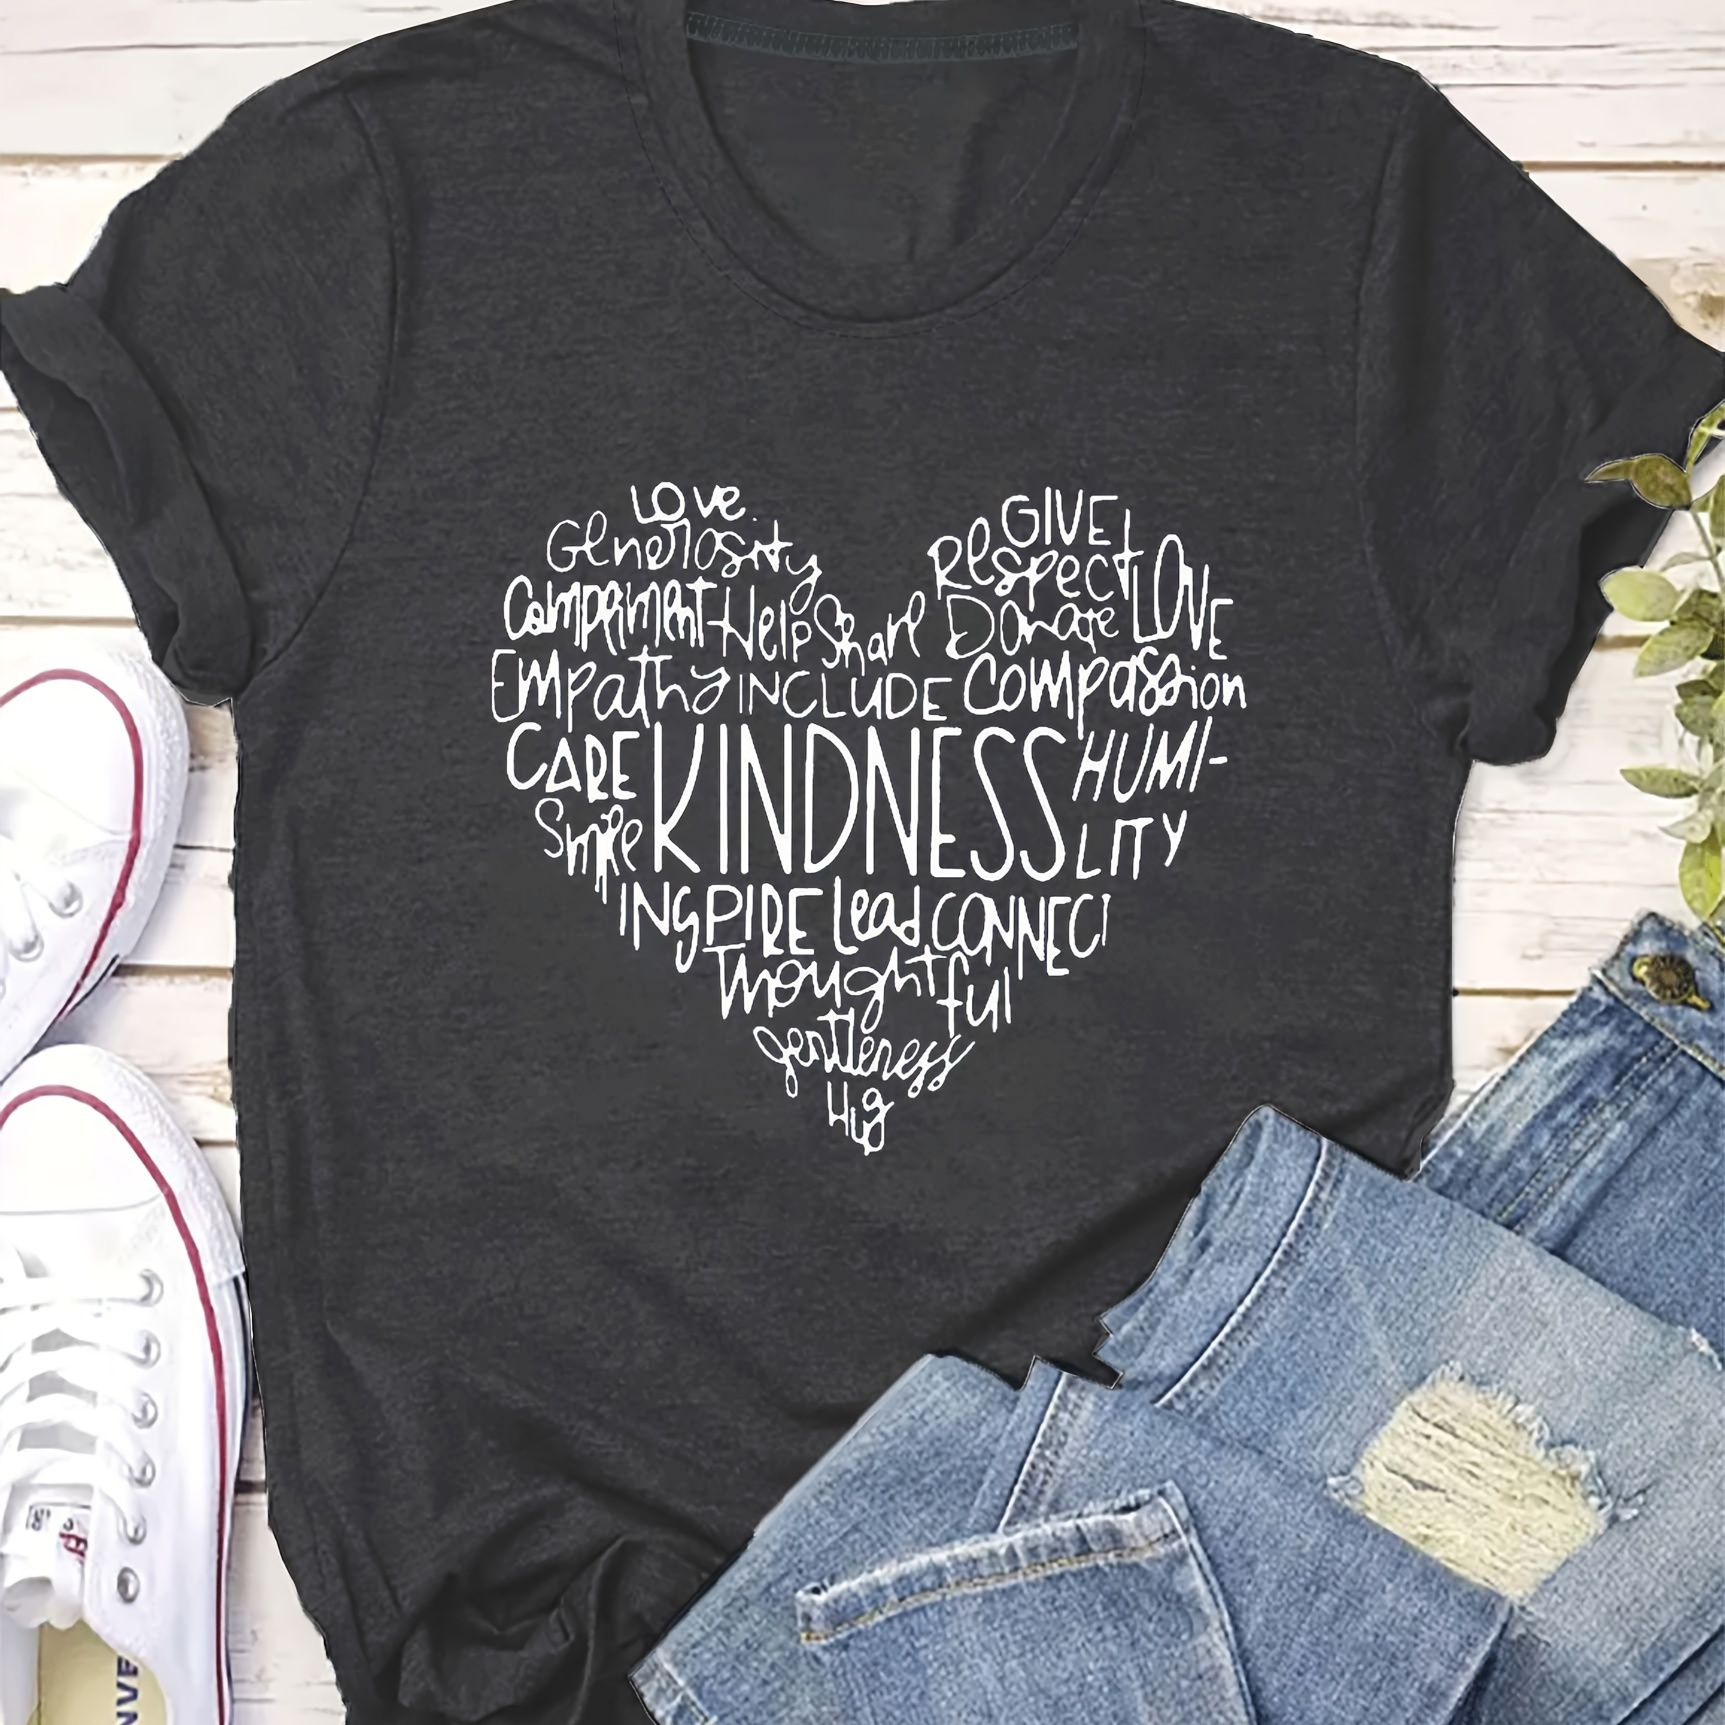 

Kindness & Heart Print T-shirt, Short Sleeve Crew Neck Casual Top For Summer & Spring, Women's Clothing